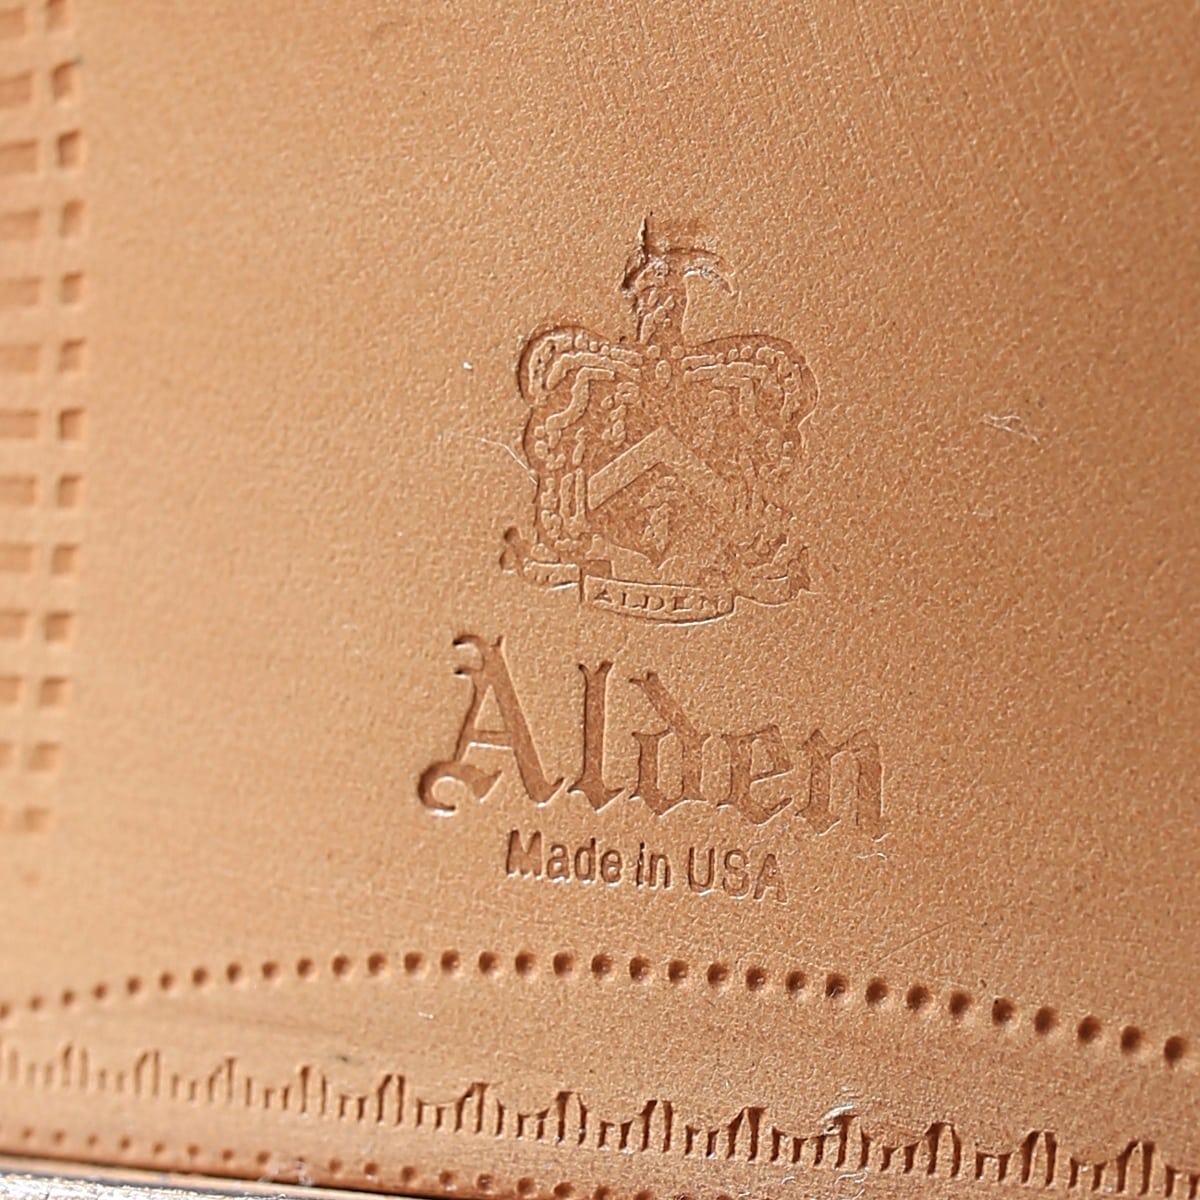 The only original shoe and bootmaker remaining in New England, Alden dress shoes have been made in the USA by skilled shoemakers in Middleborough, Massachusetts, since 1884